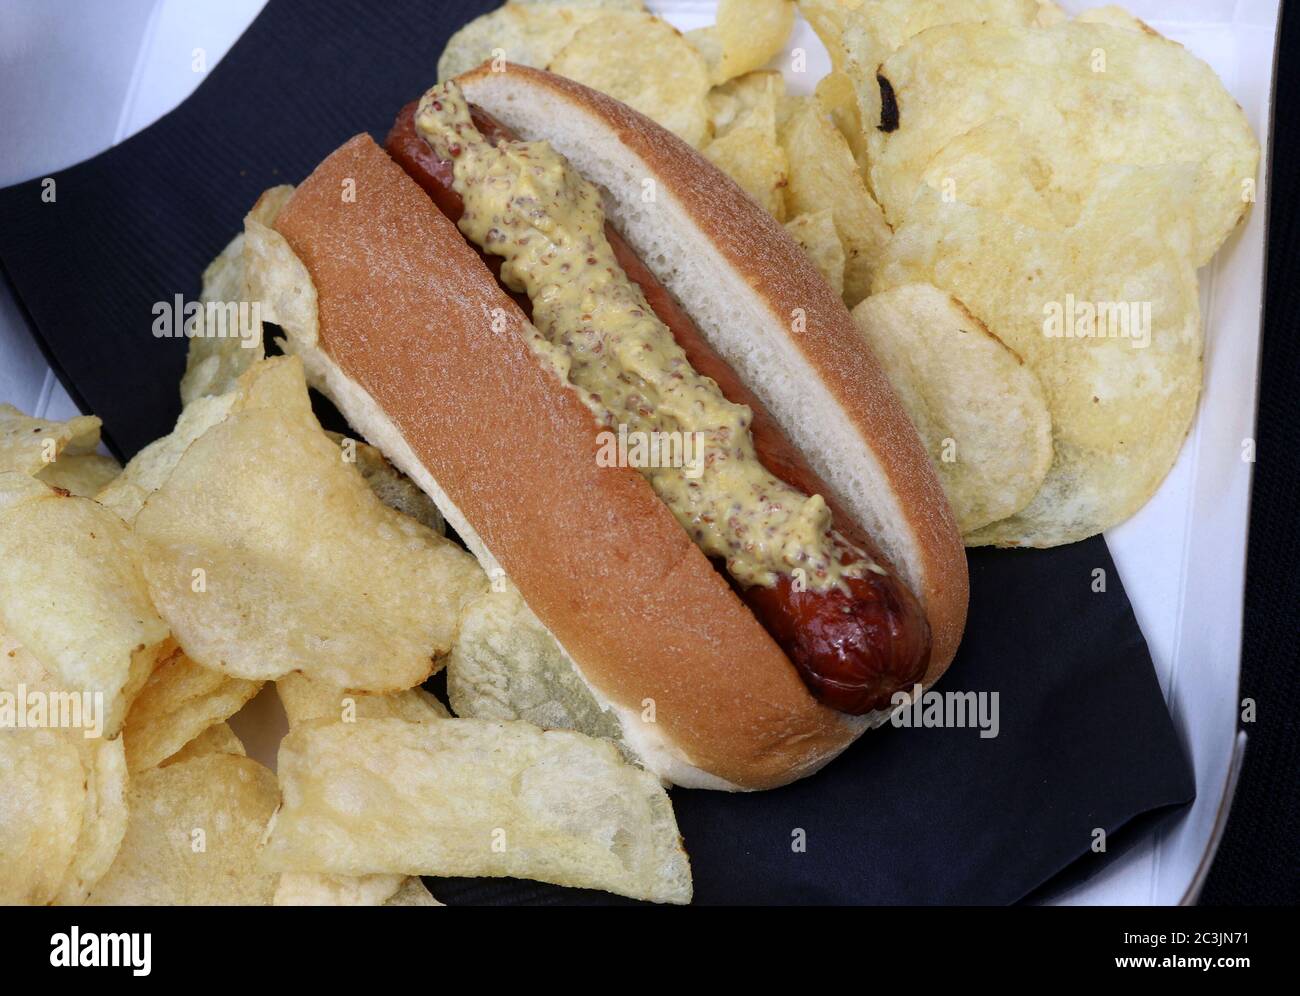 Hotdog covered in mustard inside a bun with potato chips on a black napkin Stock Photo